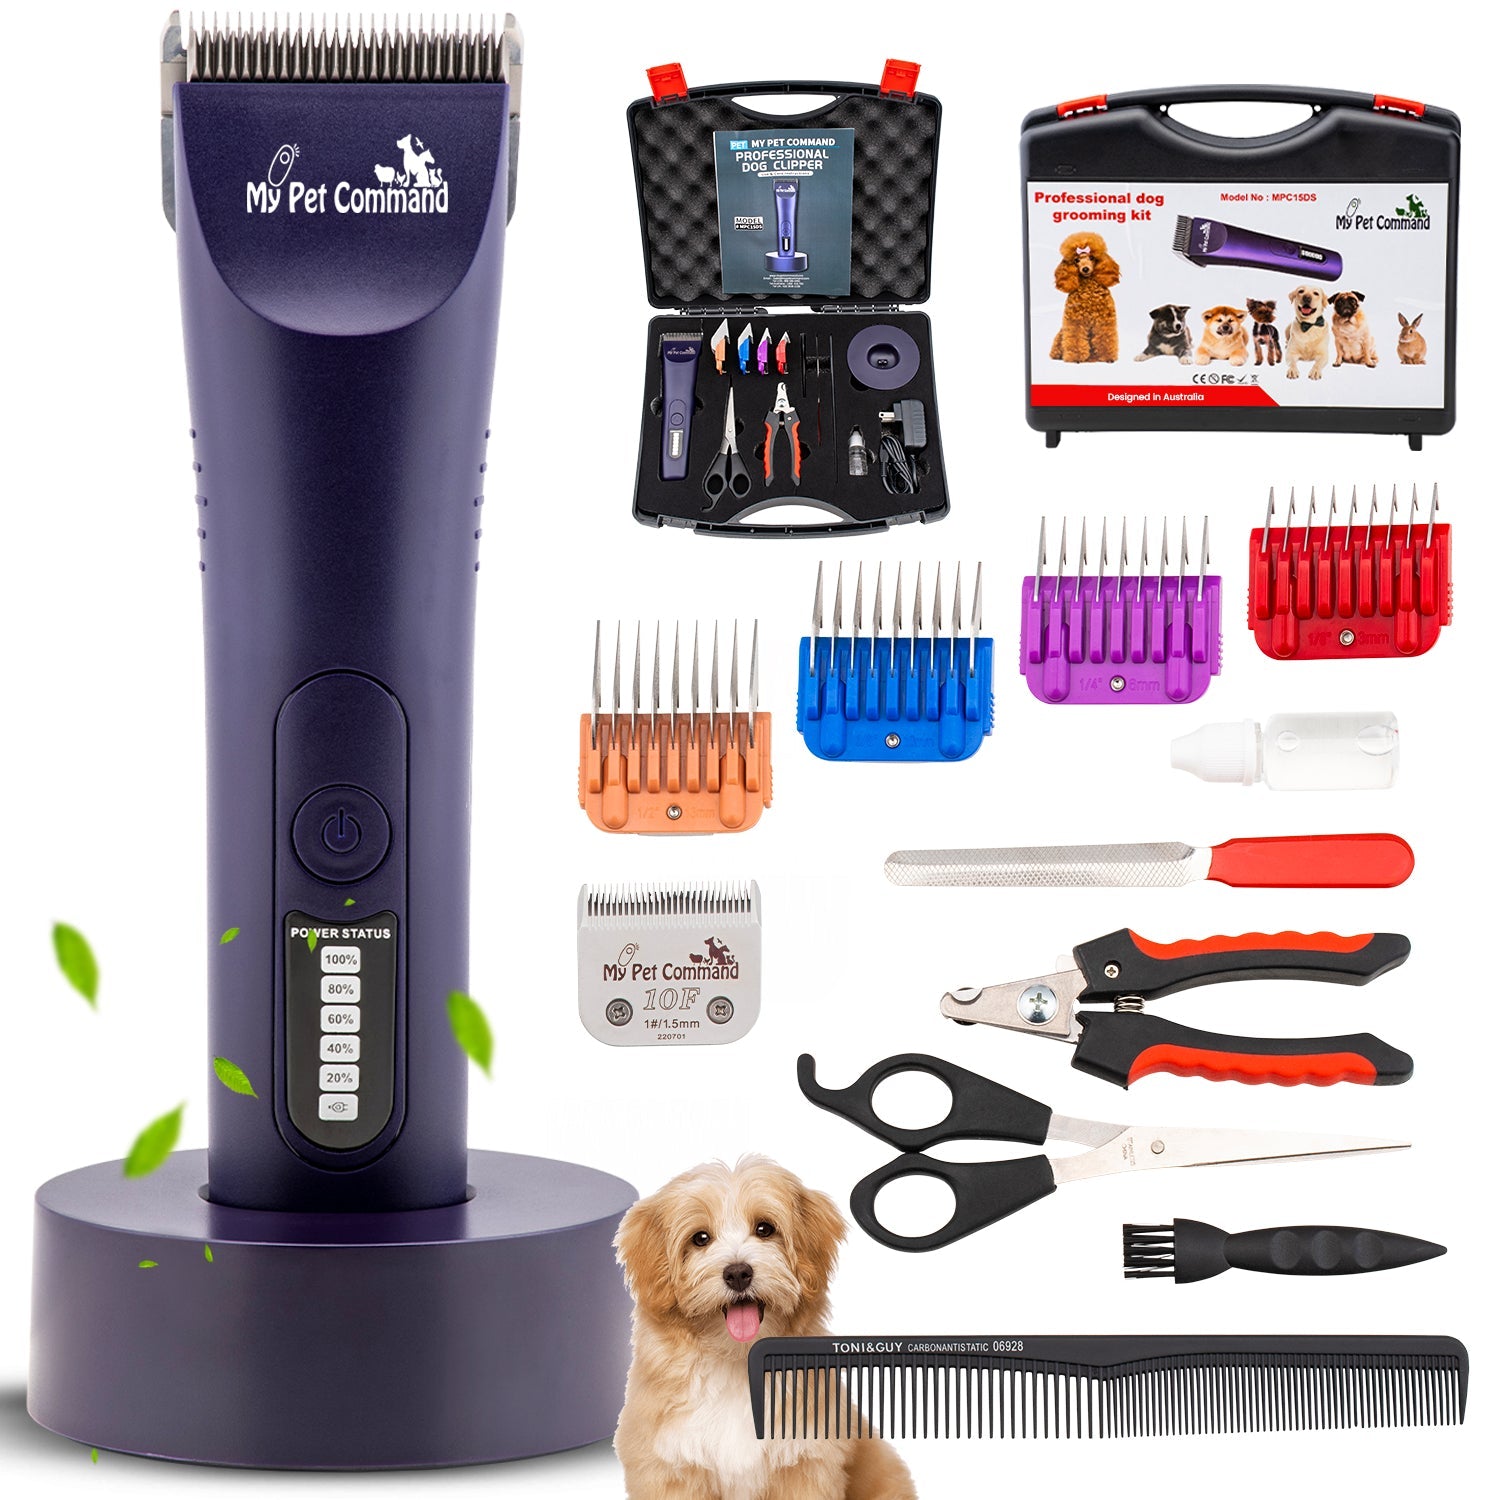 My Pet Command Professional Dog Grooming Clippers Thick Coats Cordless Heavy Duty Kit for Dogs Pets Cats Intelligent Low Nois